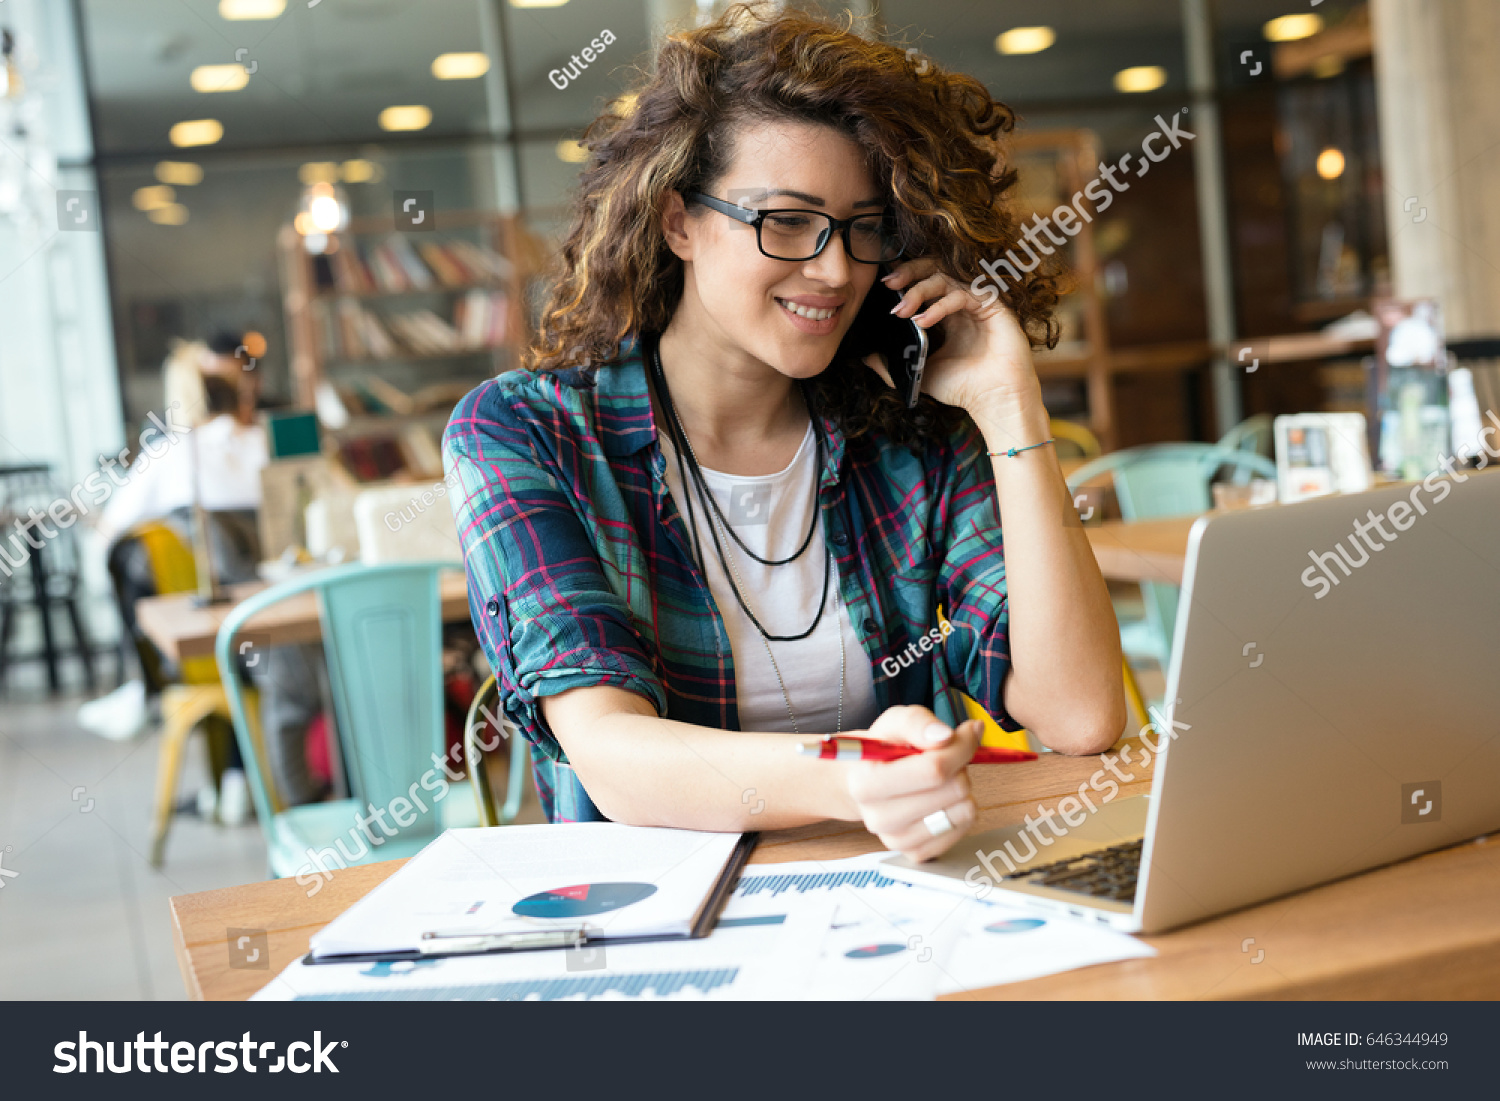 Modern business woman in city cafe. Surfing the web. #646344949